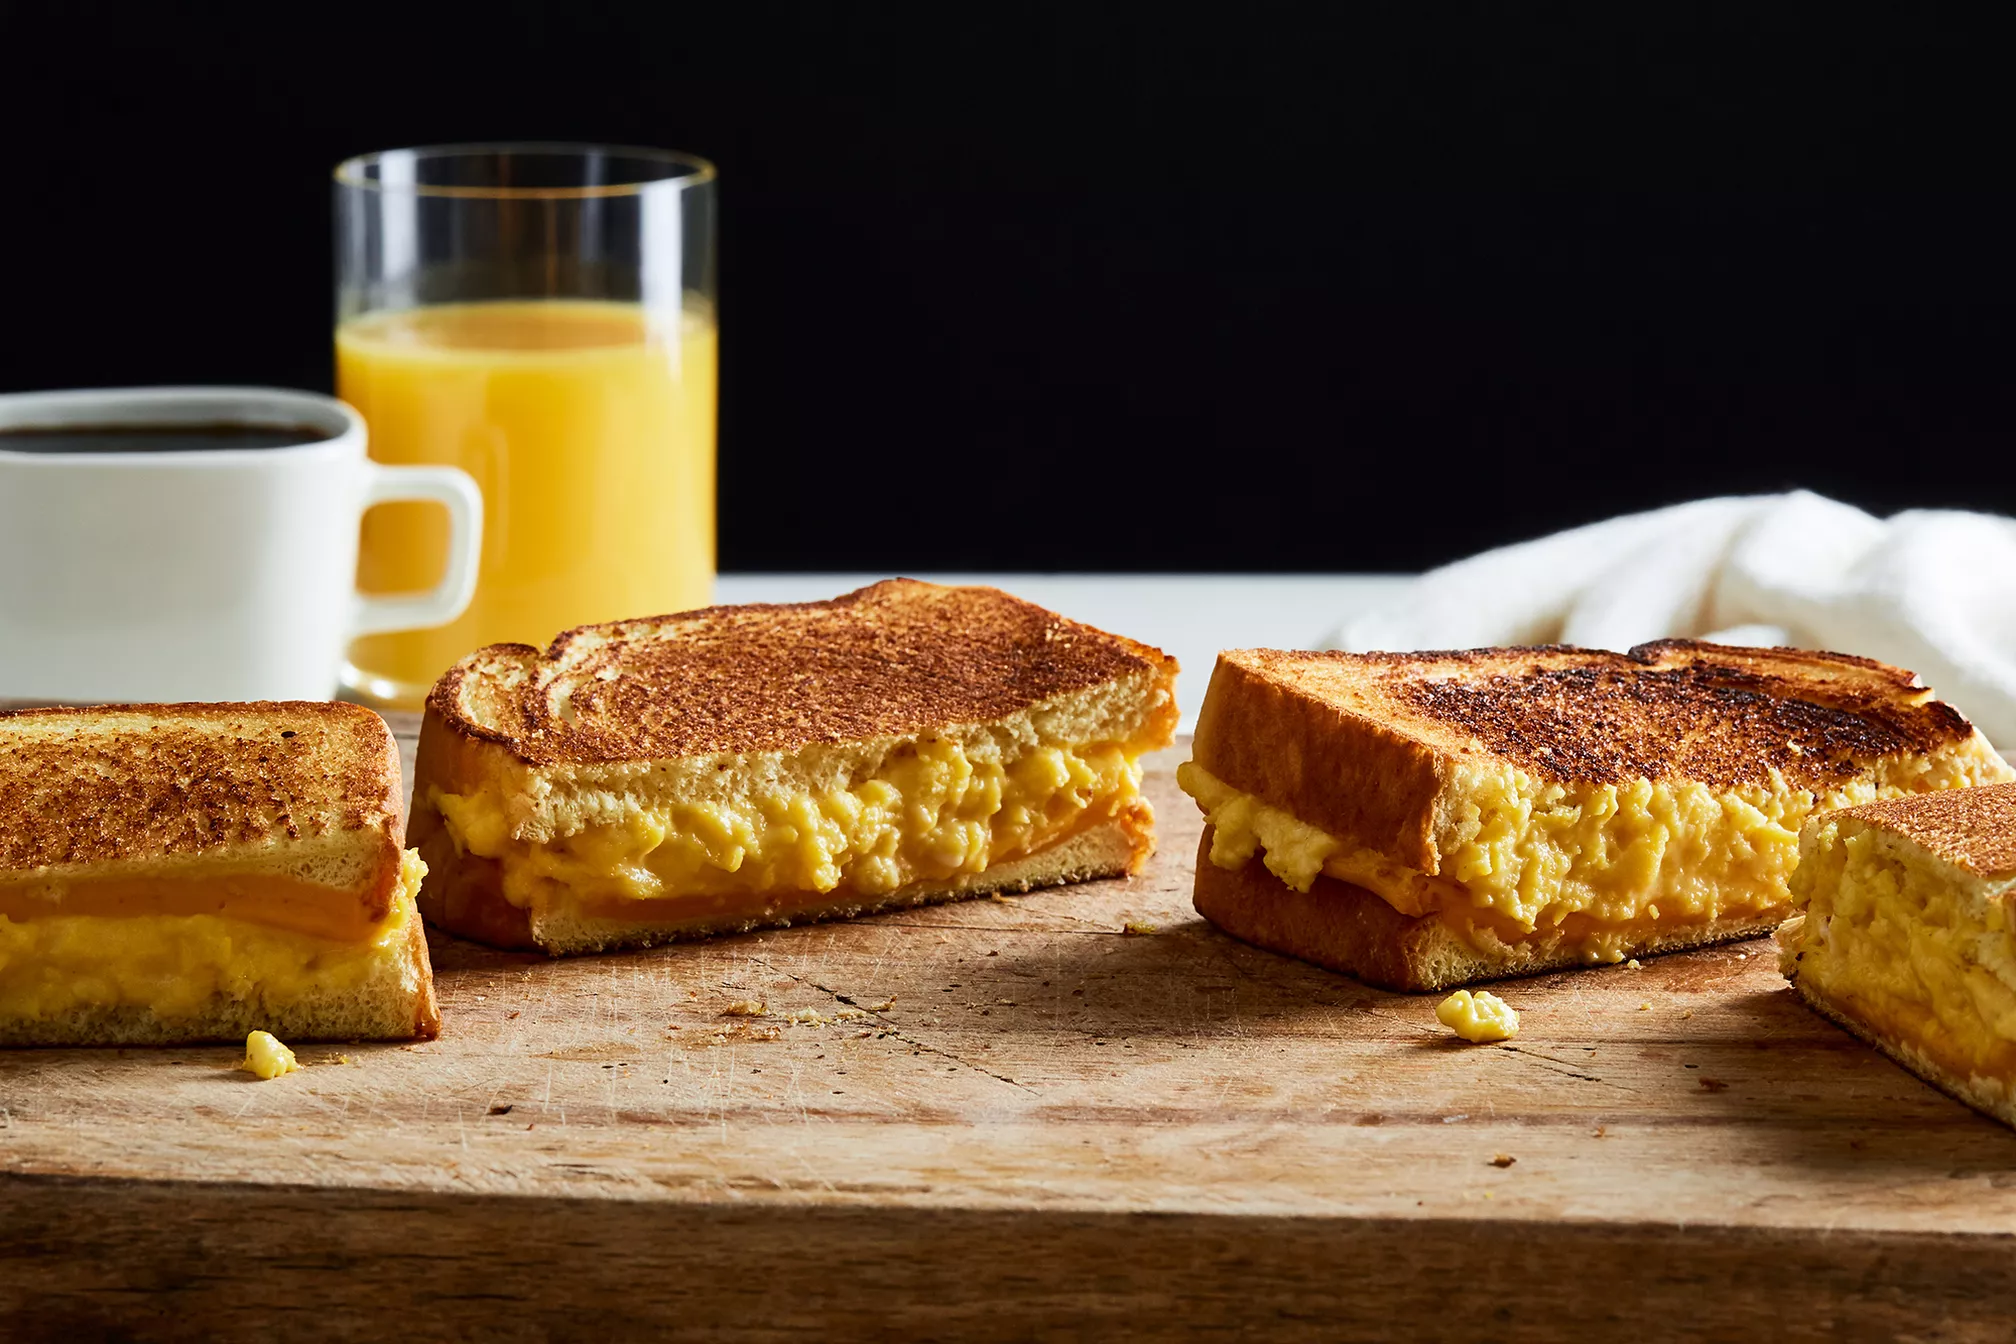 Wylie Dufresne S Soft Scrambled Egg Grilled Cheese Recipe On Food52